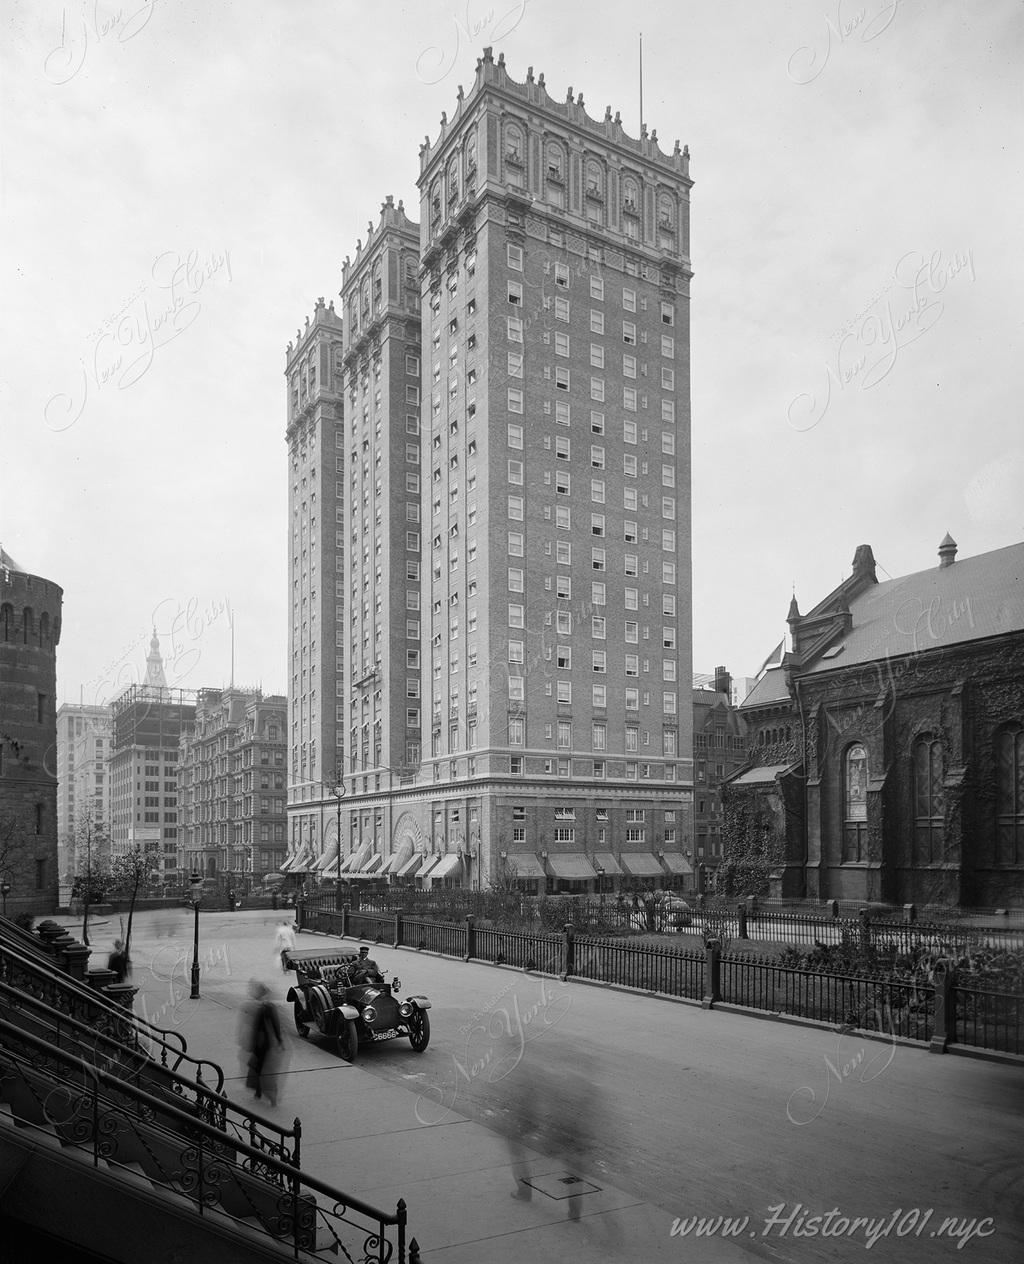 Photograph of The Vanderbilt Hotel which was built at 4 Park Avenue, between East 33rd and 34th Street in 1910-13, and designed by Warren & Wetmore. 